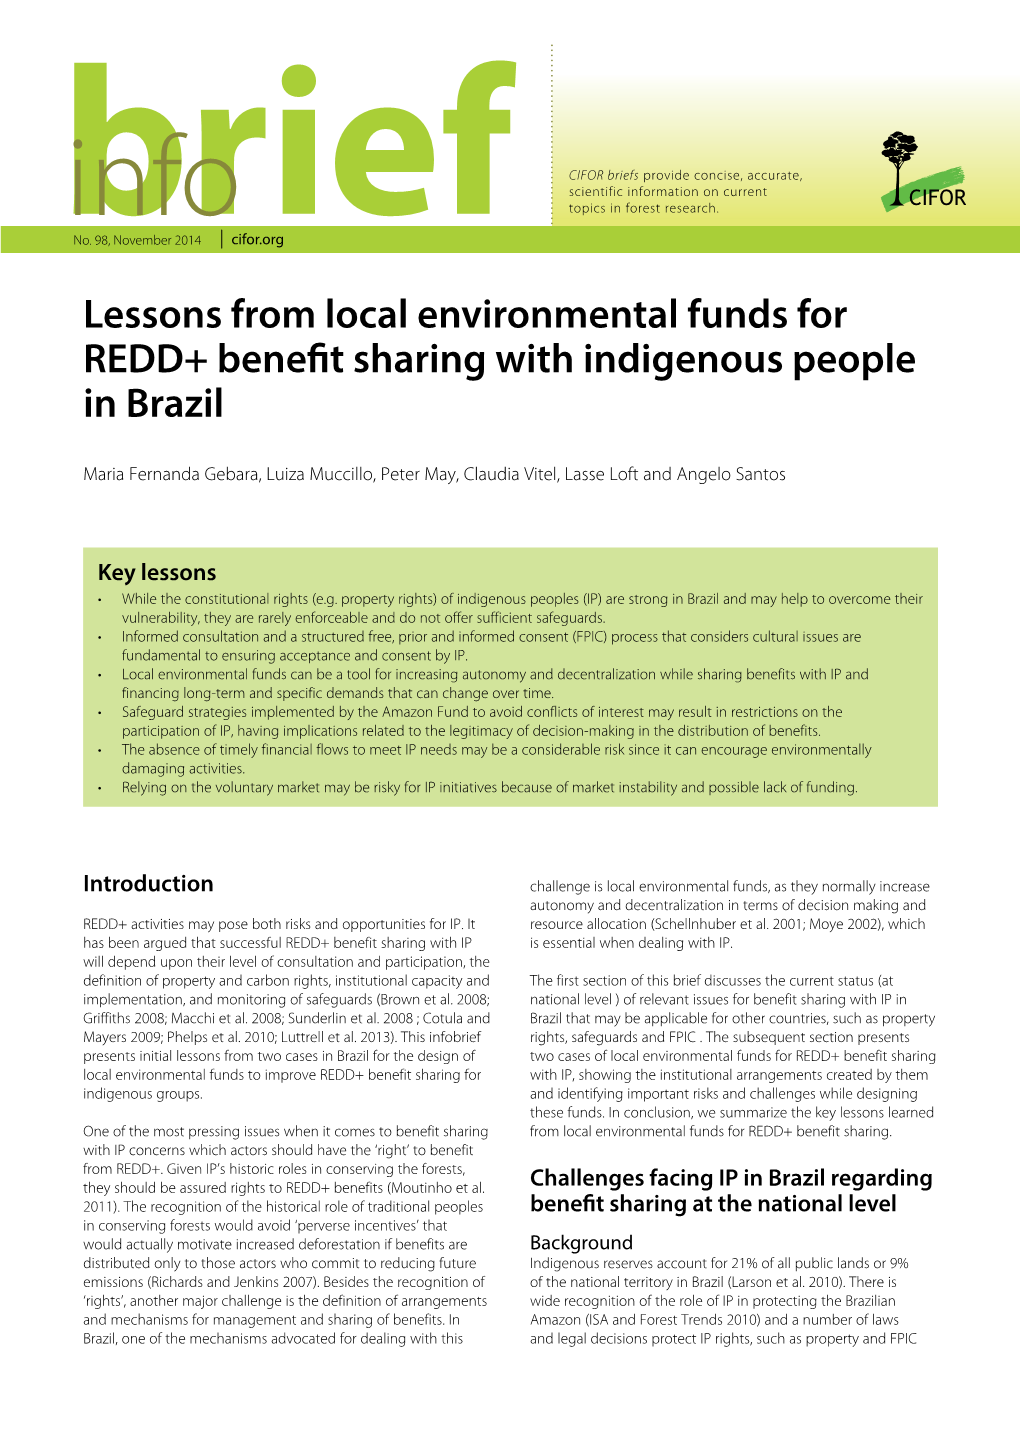 Lessons from Local Environmental Funds for REDD+ Benefit Sharing with Indigenous People in Brazil